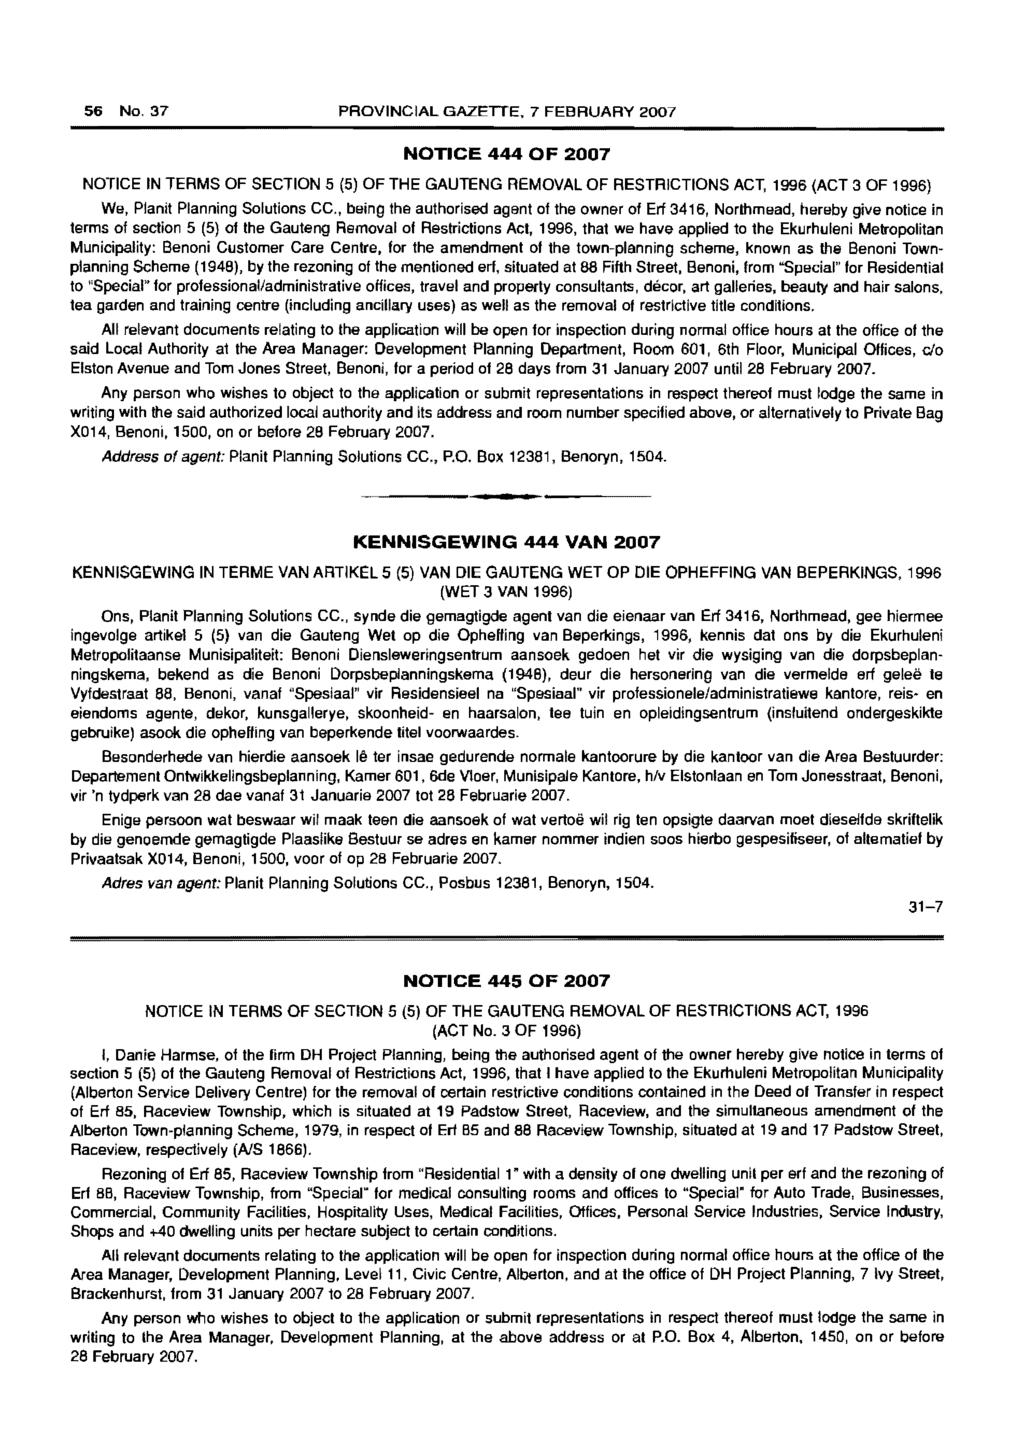 56 No. 37 PROVINCIAL GAZETTE, 7 FEBRUARY 2007 NOTICE 444 OF 2007 NOTICE IN TERMS OF SECTION 5 (5) OF THE GAUTENG REMOVAL OF RESTRICTIONS ACT, 1996 (ACT 3 OF 1996) We, Planit Planning Solutions CC.